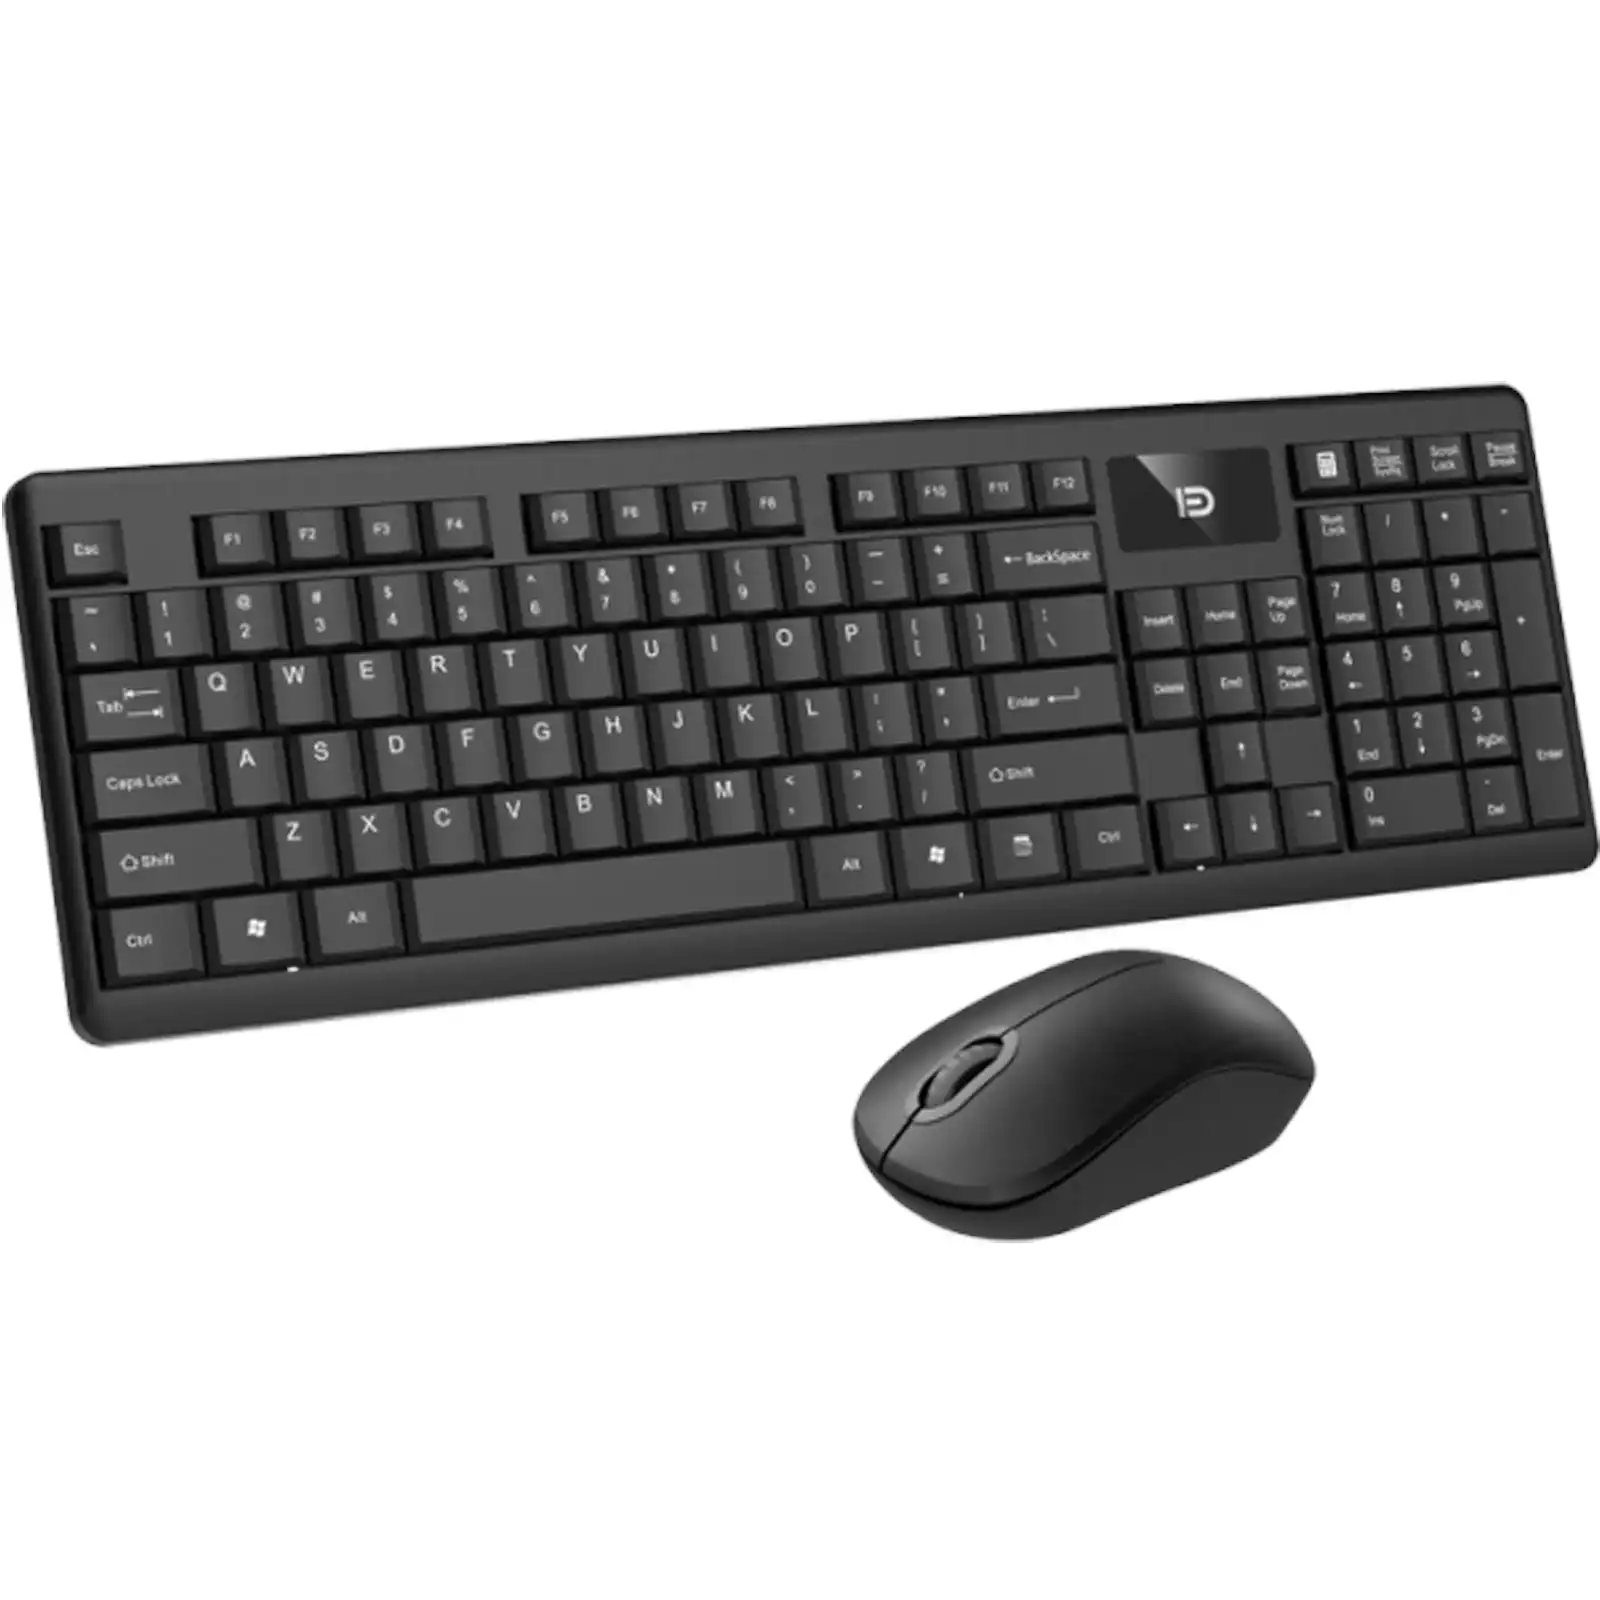 TODO 2.4Ghz Wireless Keyboard Optical Mouse Combo Mac Windows Android 105 Key - Black